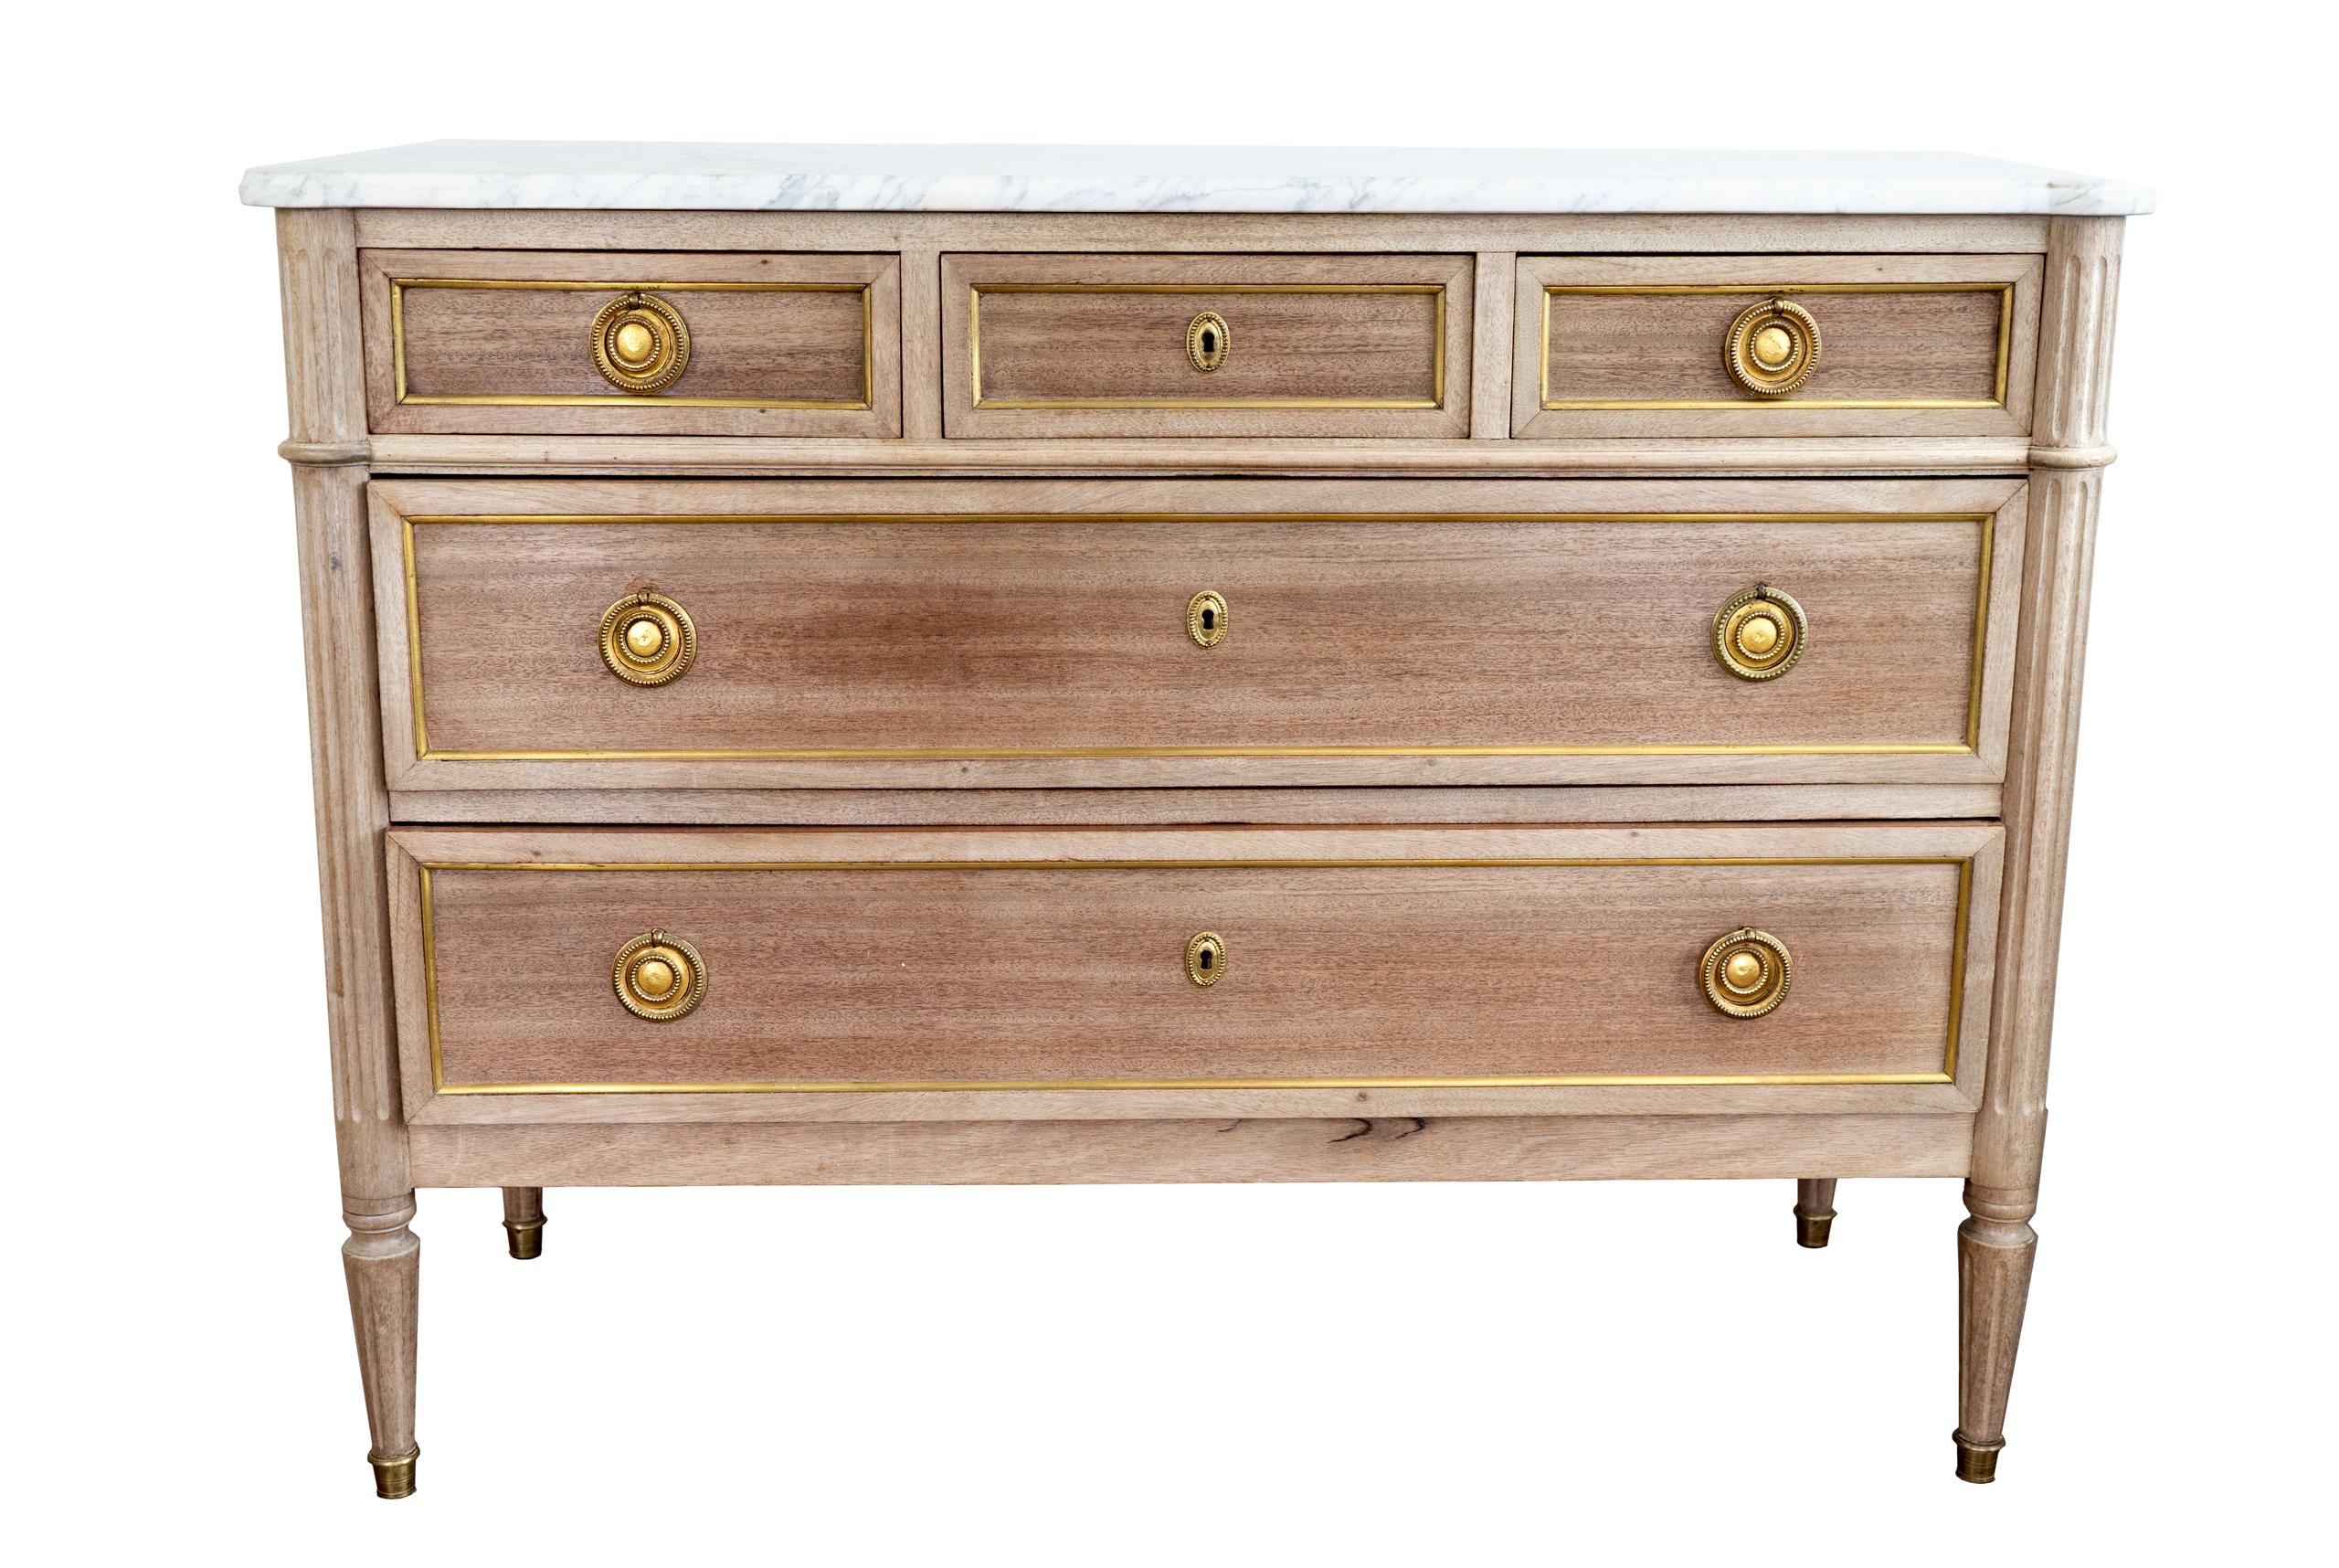 Beautiful five-drawer commode Louis XVI style chest with a white Carrara marble top and brass pulls. Bleached finish. The chest sits tapered fluted legs with fine detailing.